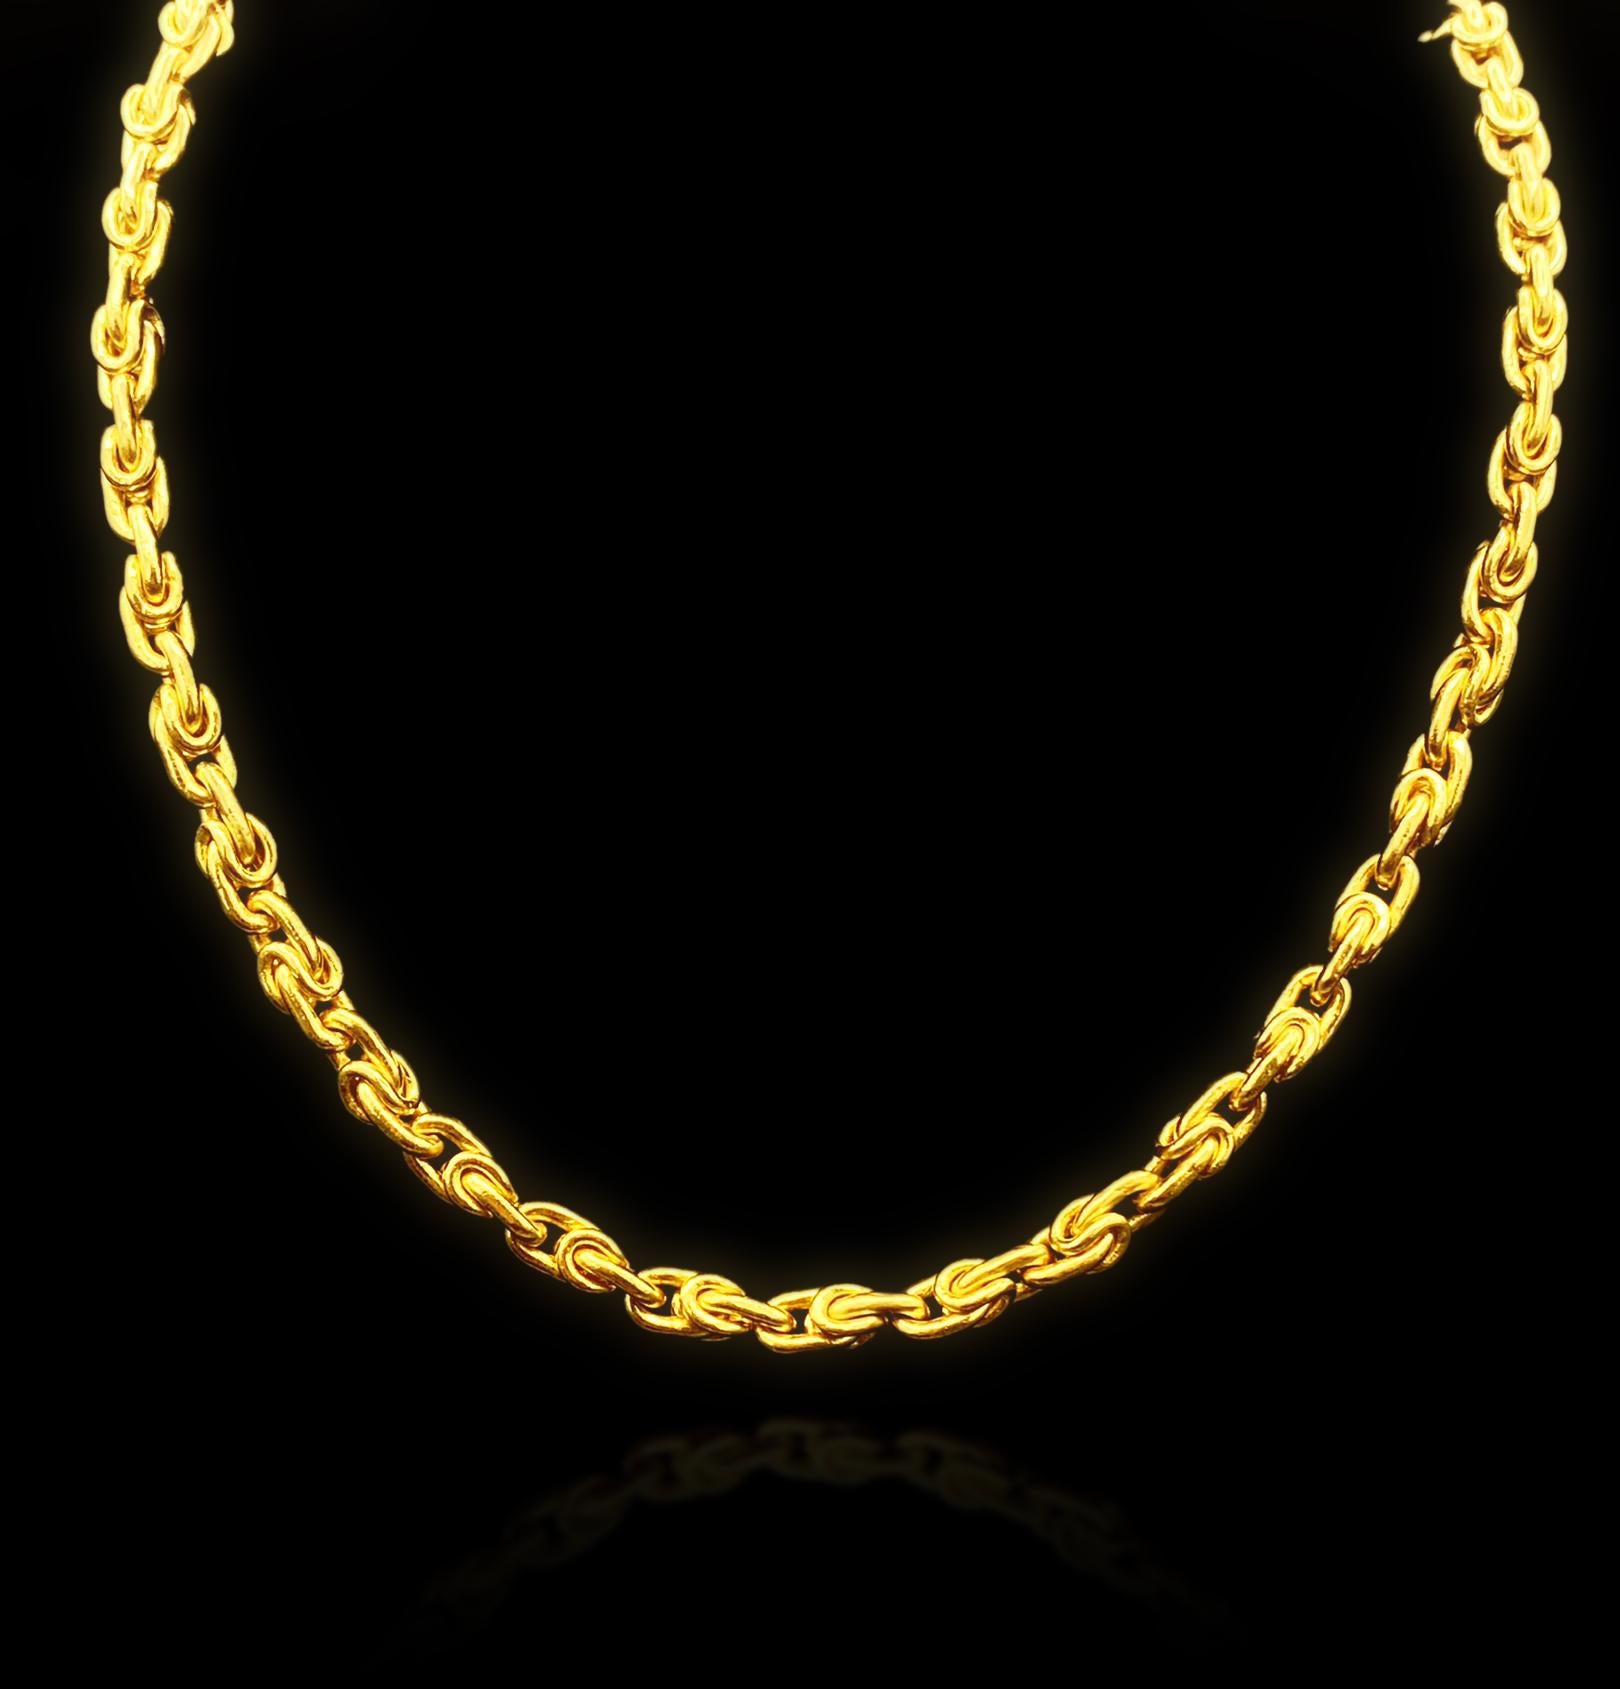 -Made to order.
-Handmade
-24K Gold
-Please allow 3-4 weeks for this product to be handcrafted.
-Can be made in 16, 18 or 20 inch, send me a message with  your preference.
-The price given  is for the 16 inch chain.
-18K Lobster clasp.
-Stamped with